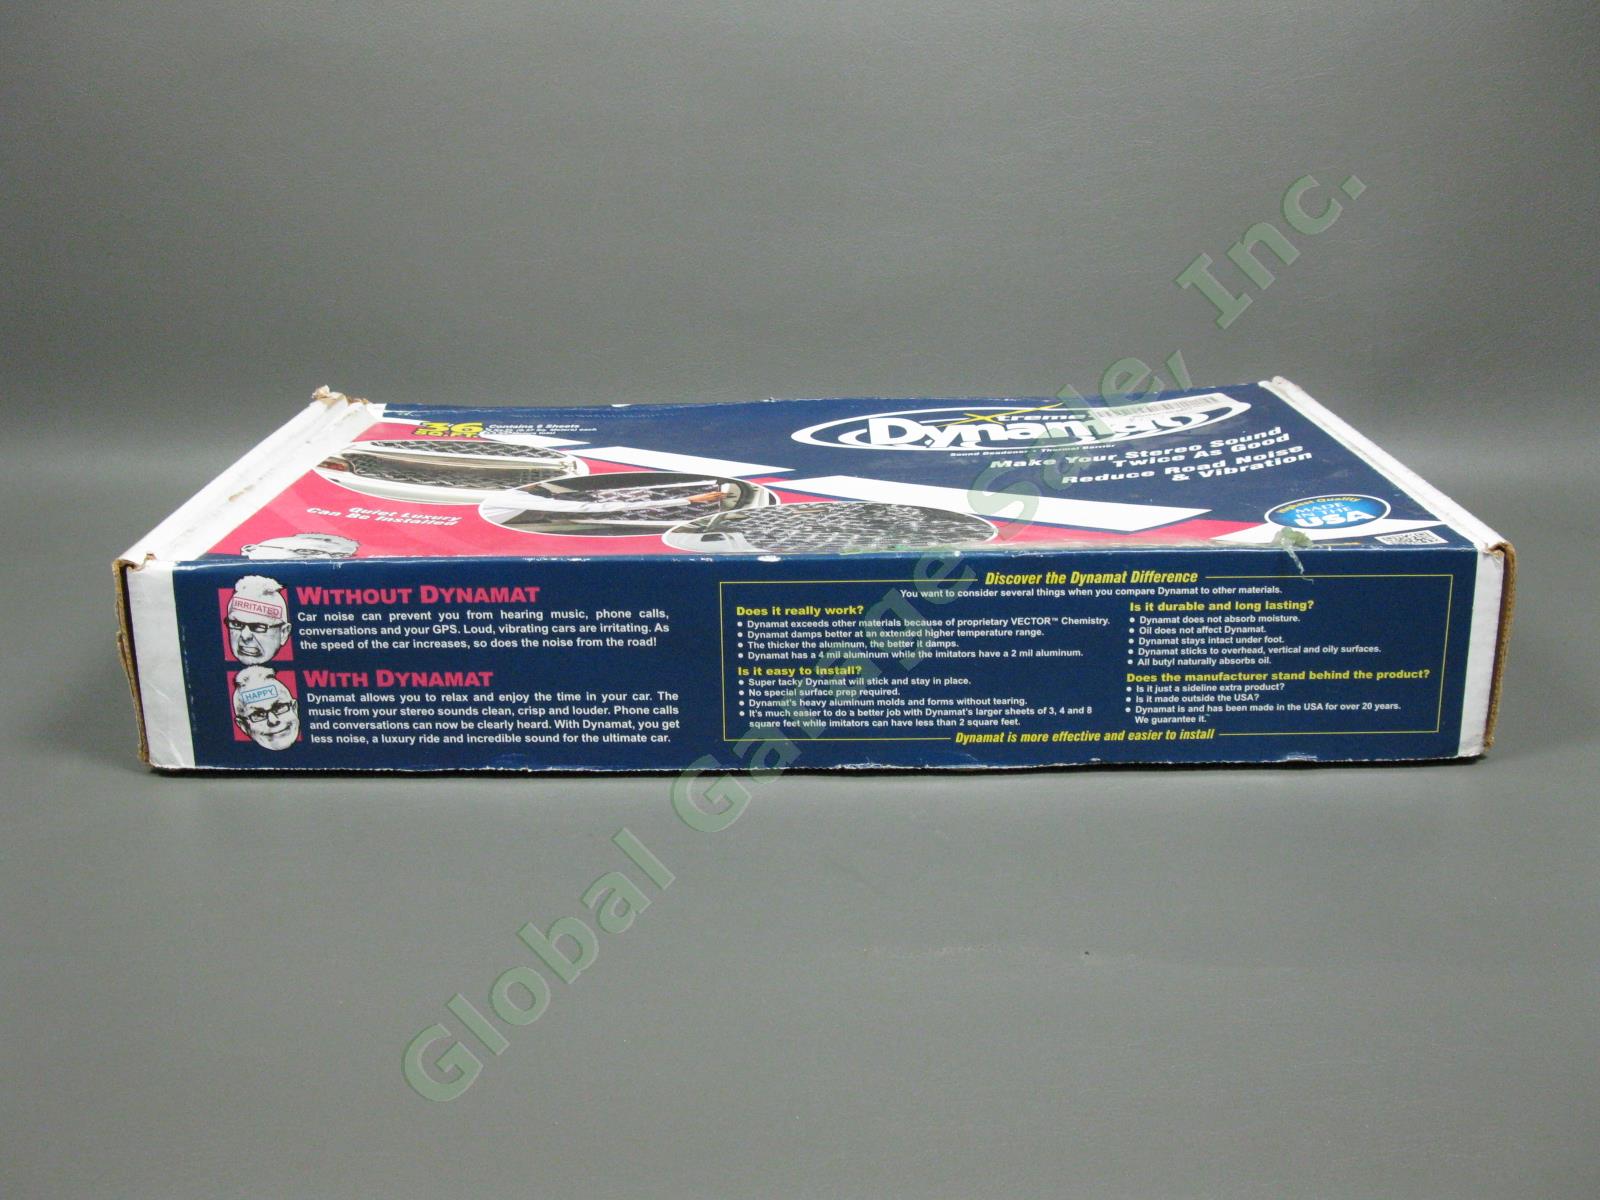 NEW Dynamat Xtreme 10455 Sound Deadener 18"x32" Self-Adhesive Thermal Barrier NR 5